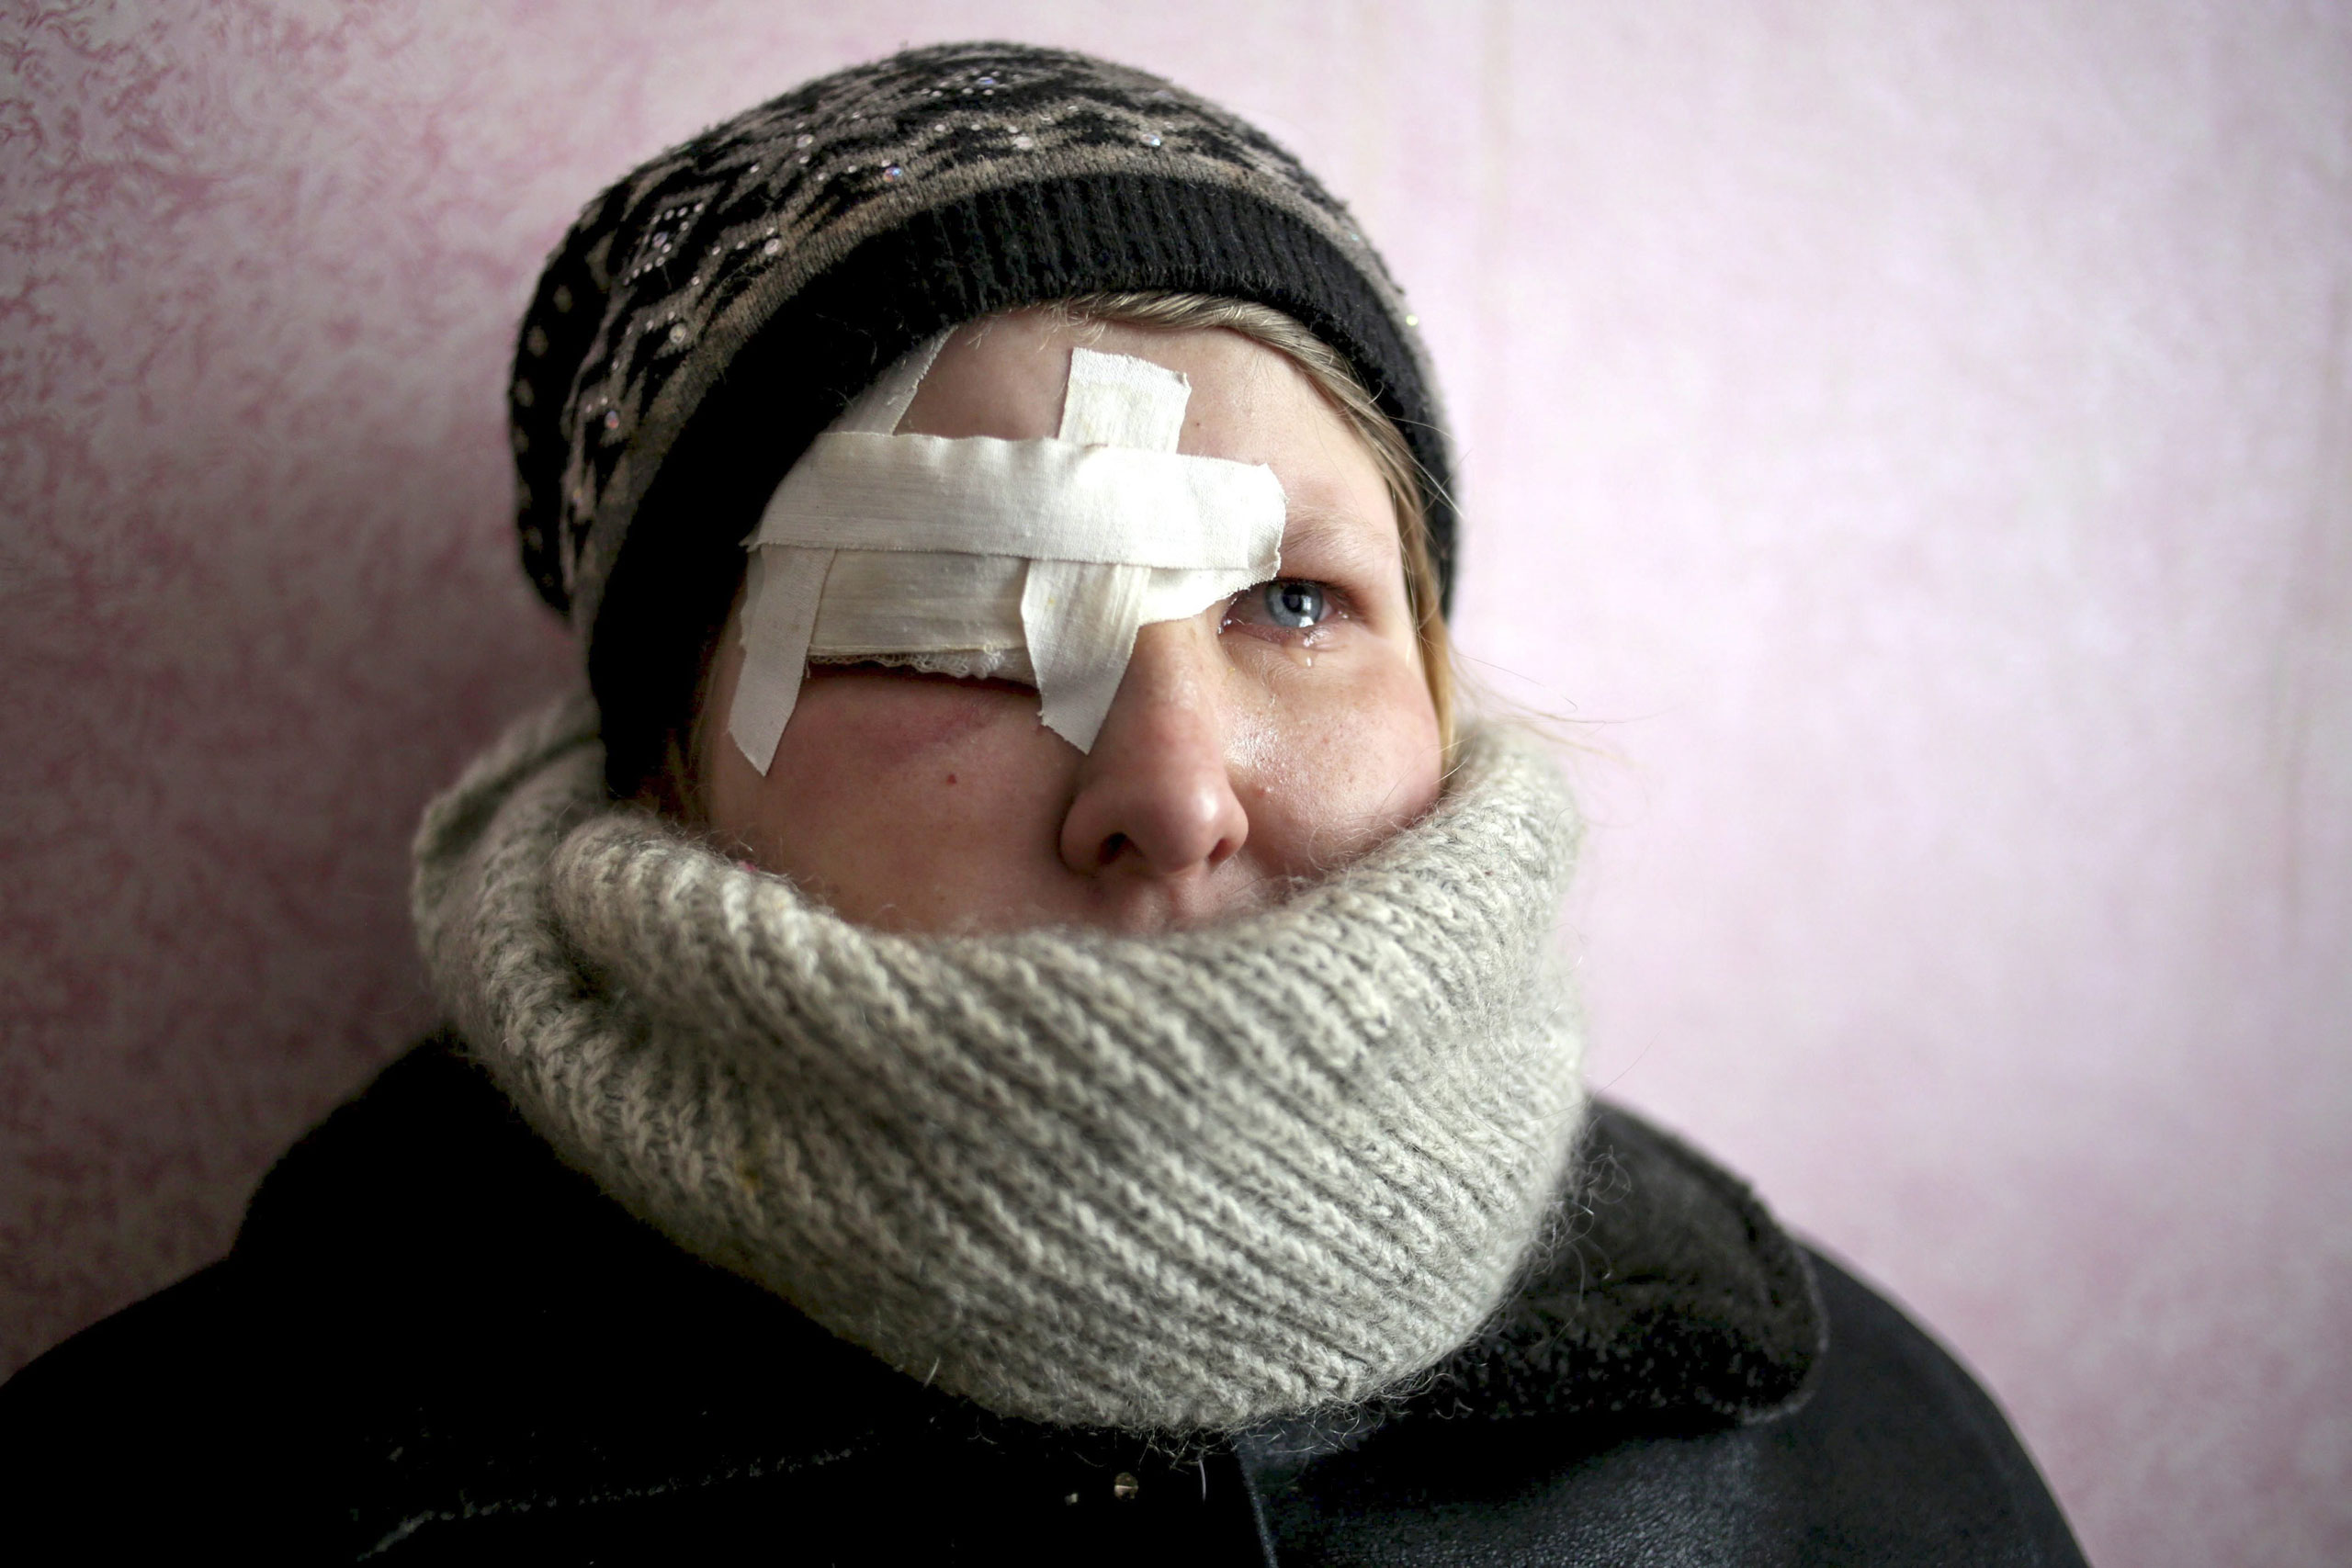 Yulia Novomlynets, 18, waits in a line to receive the humanitarian aid in the local Palace of Culture which is used as a bomb shelter in Mironovka village, near Debaltseve, Ukraine. Feb. 17, 2015.